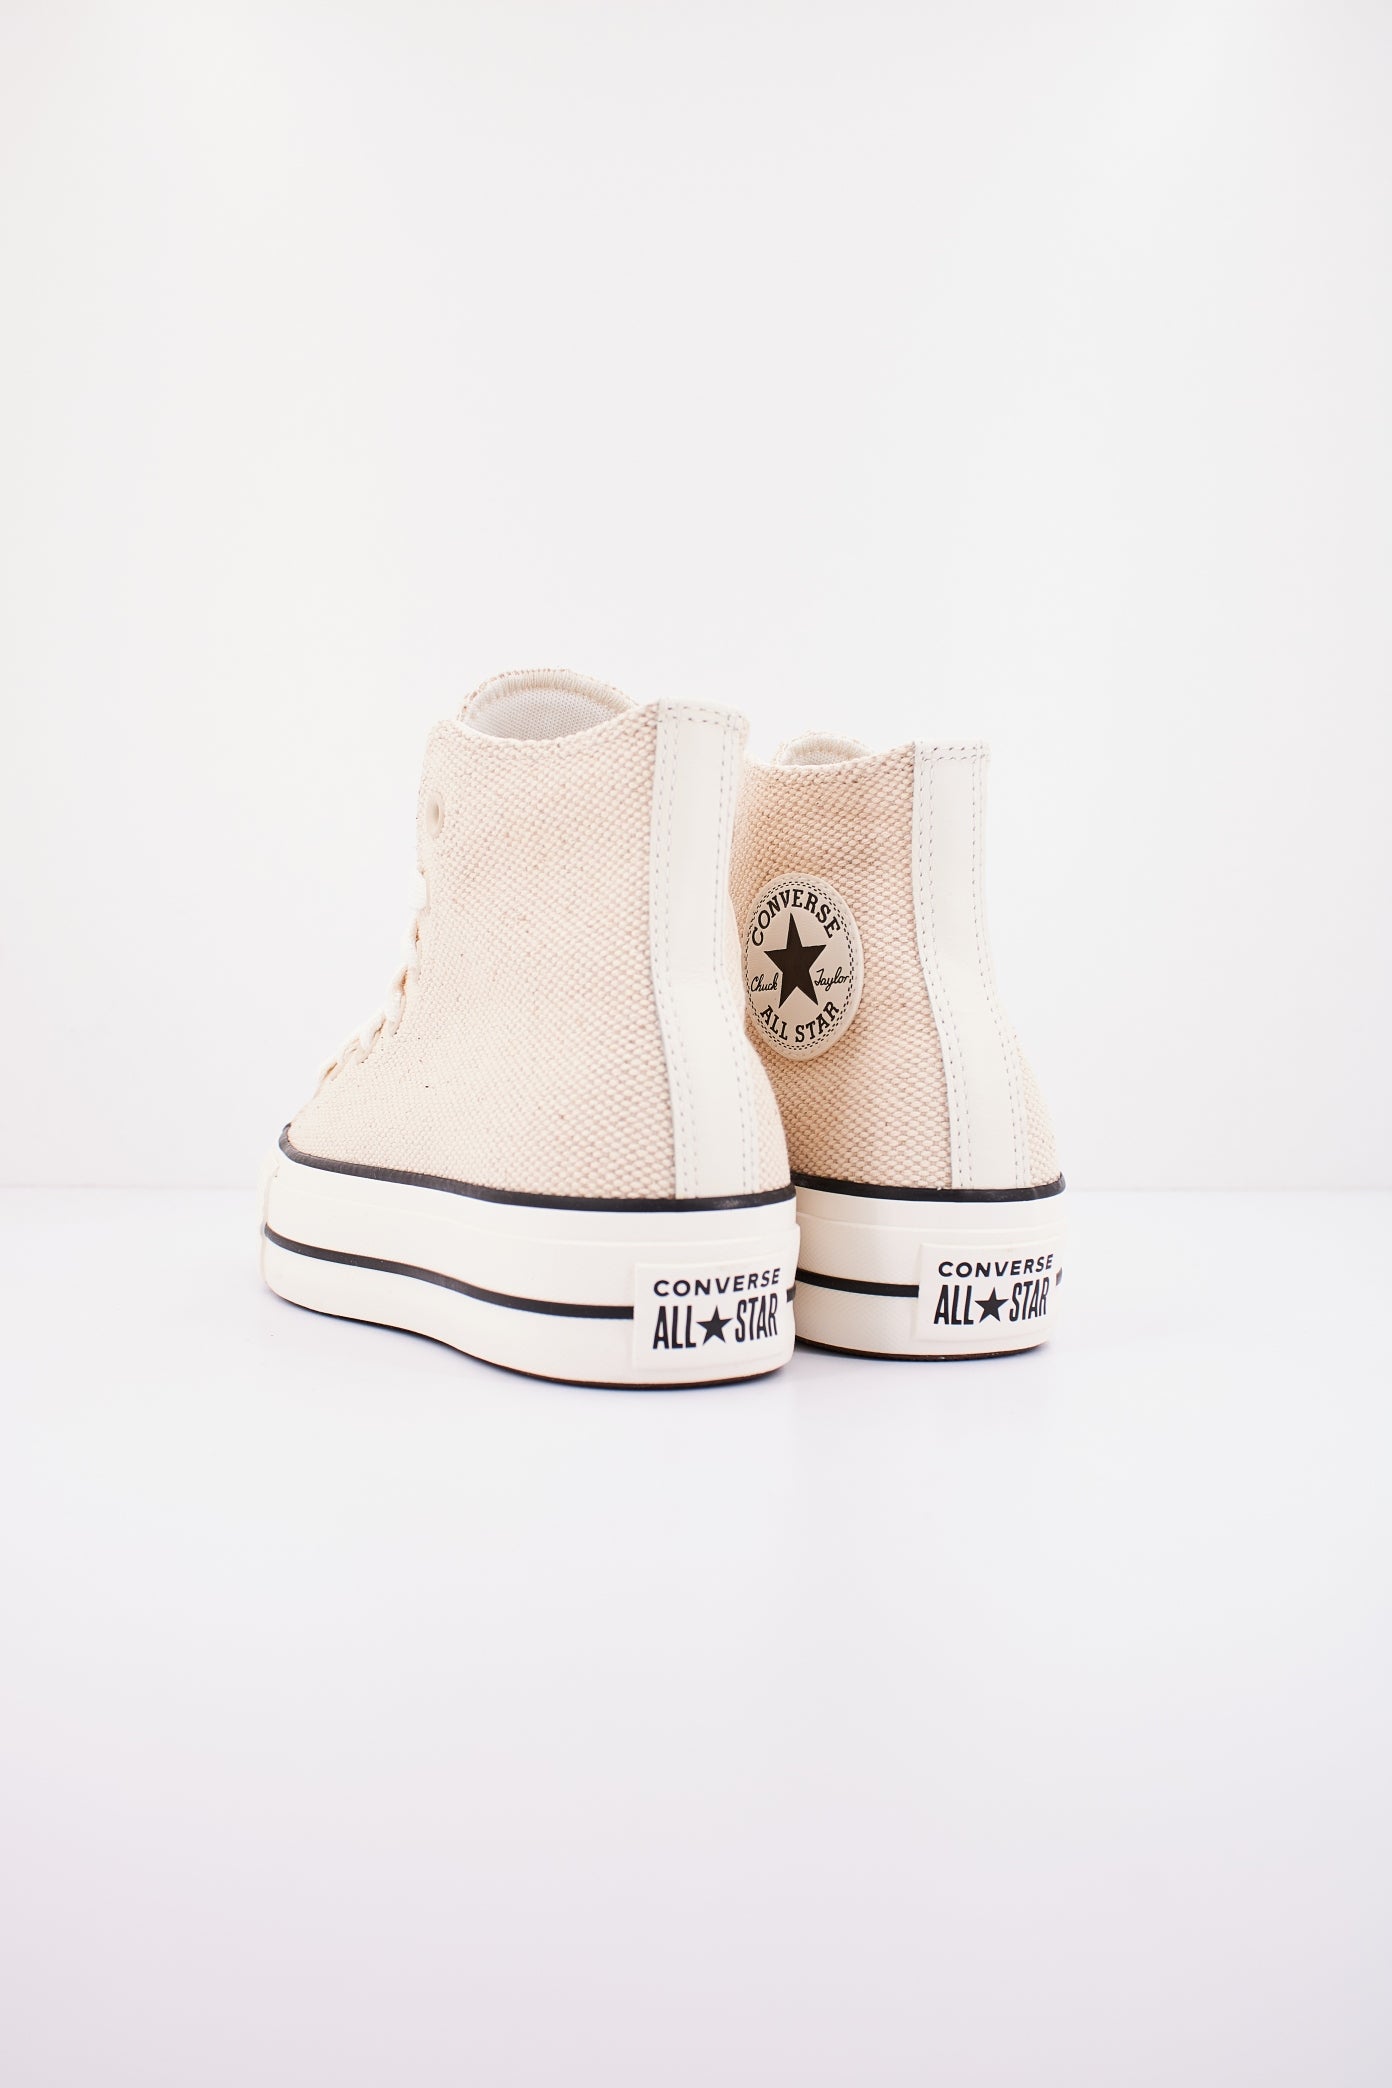 CONVERSE CHUCK TAYLOR ALL LIFT CANVAS & LEATHER en color BEIS  (3)